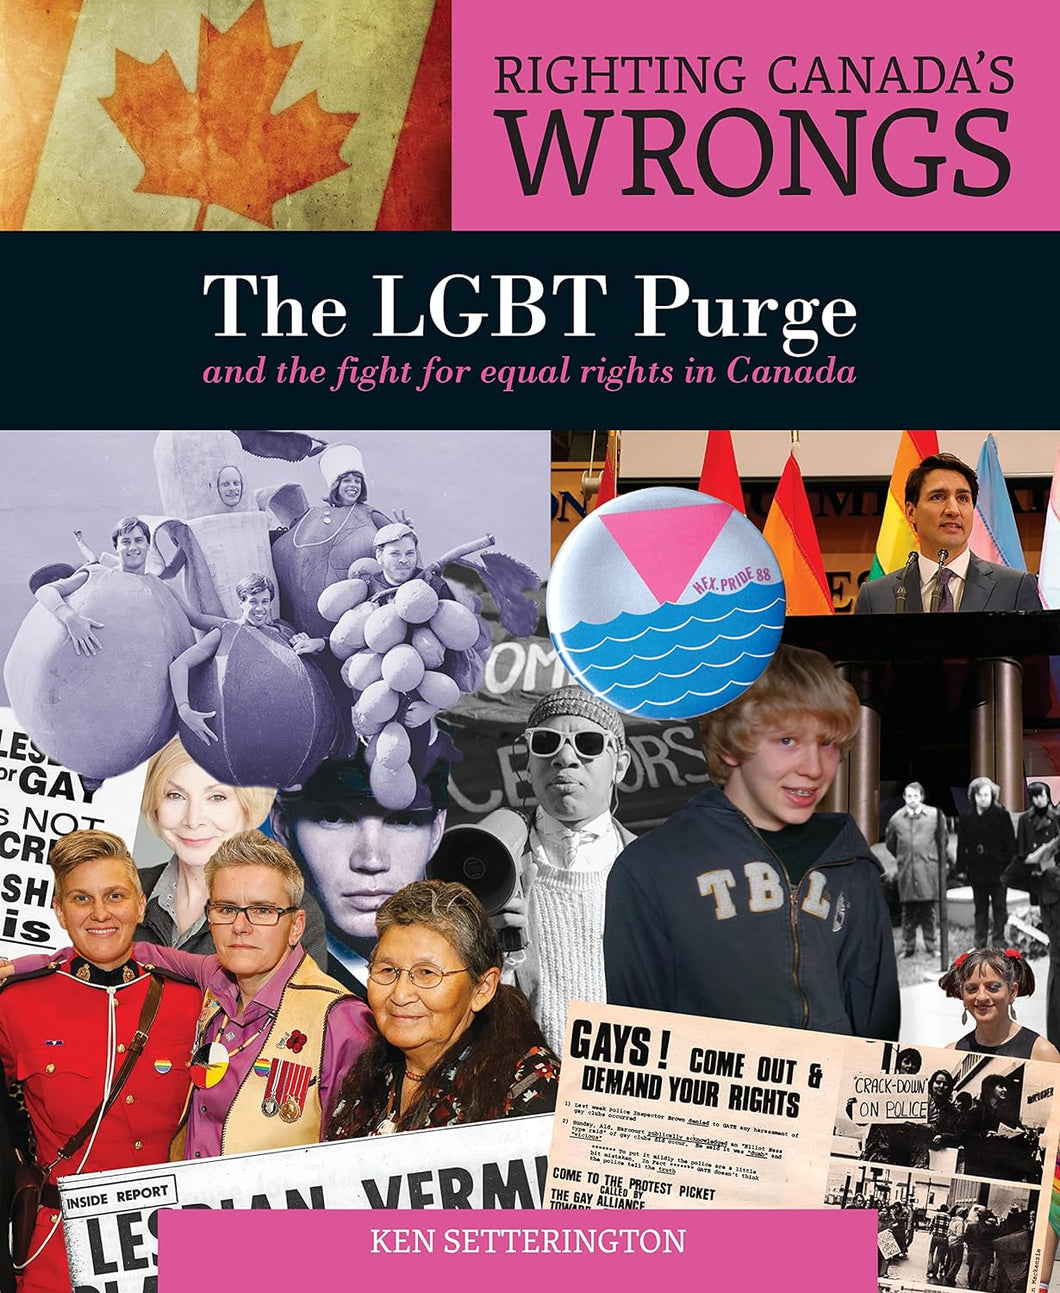 Righting Canada's Wrongs: The LGBT Purge And The Fight For Equal Rights In Canada [Ken Setterington]